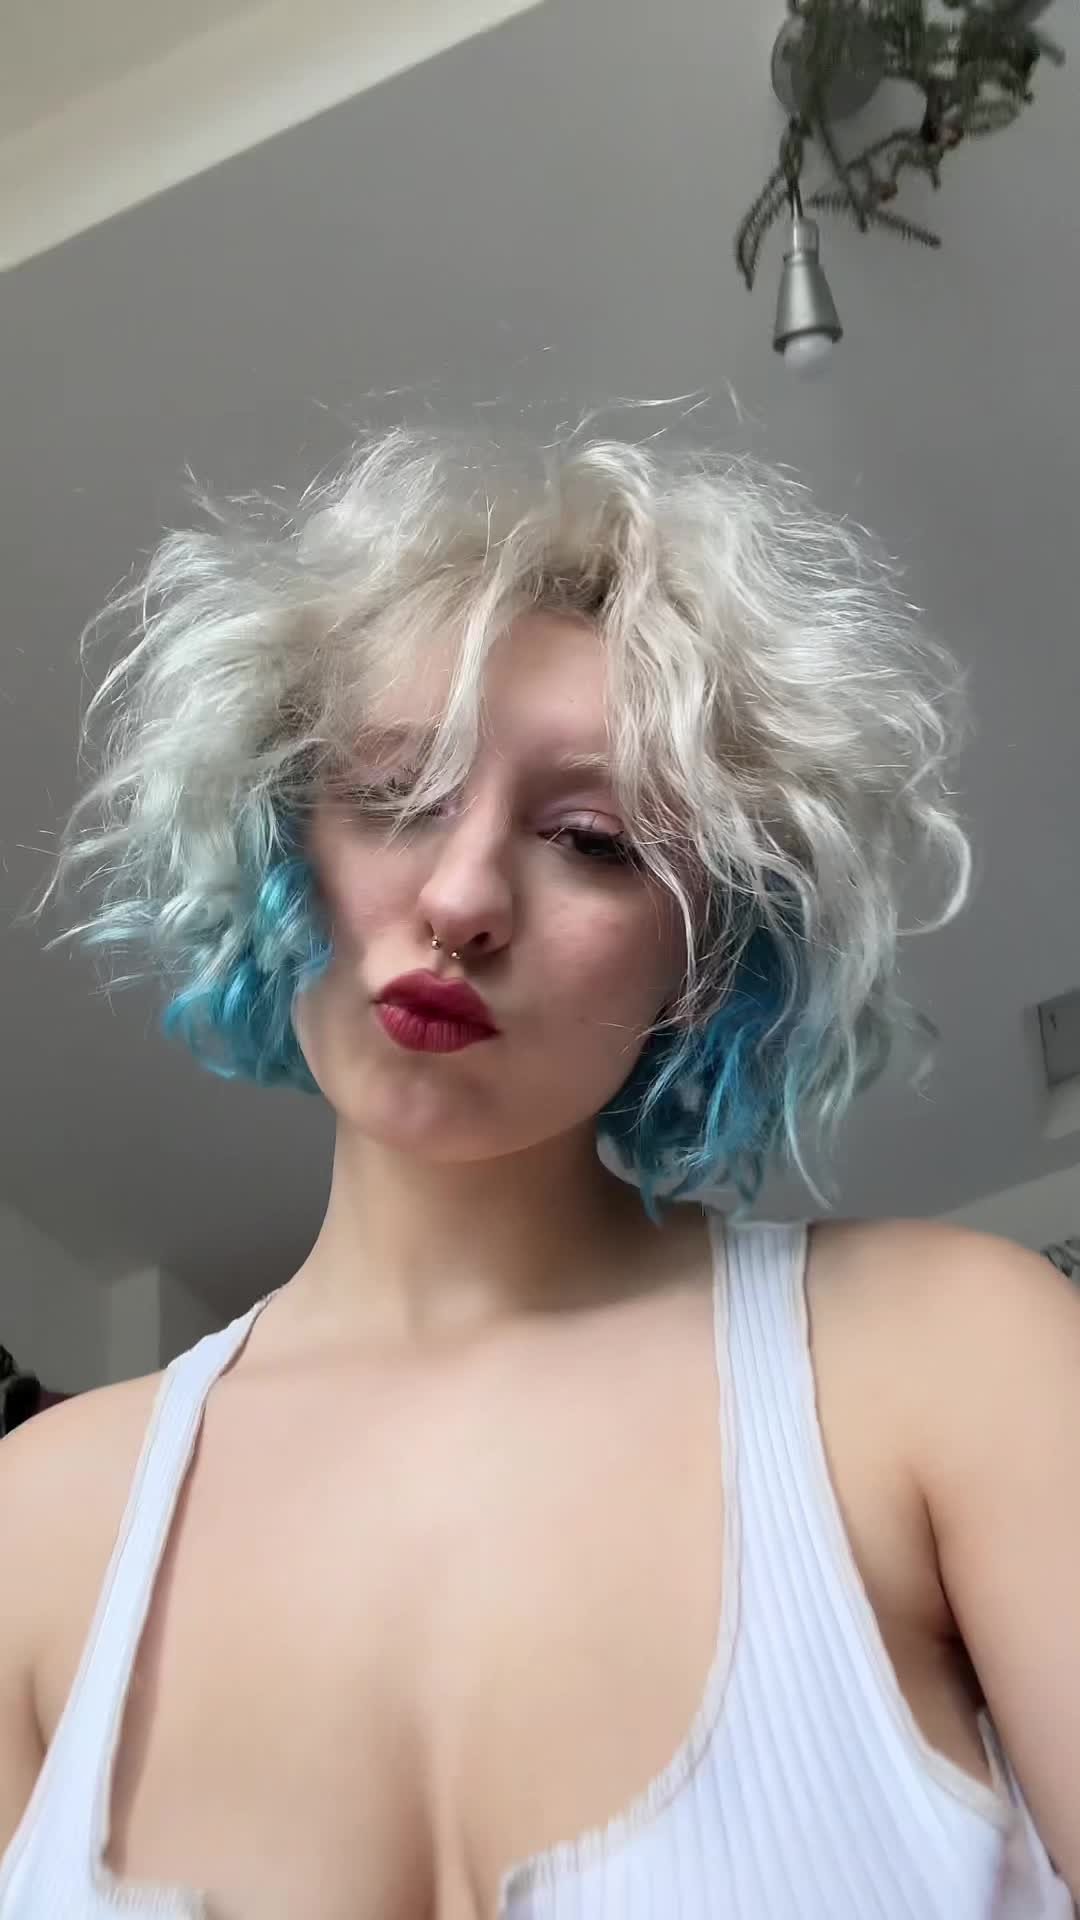 Video post by Lumi